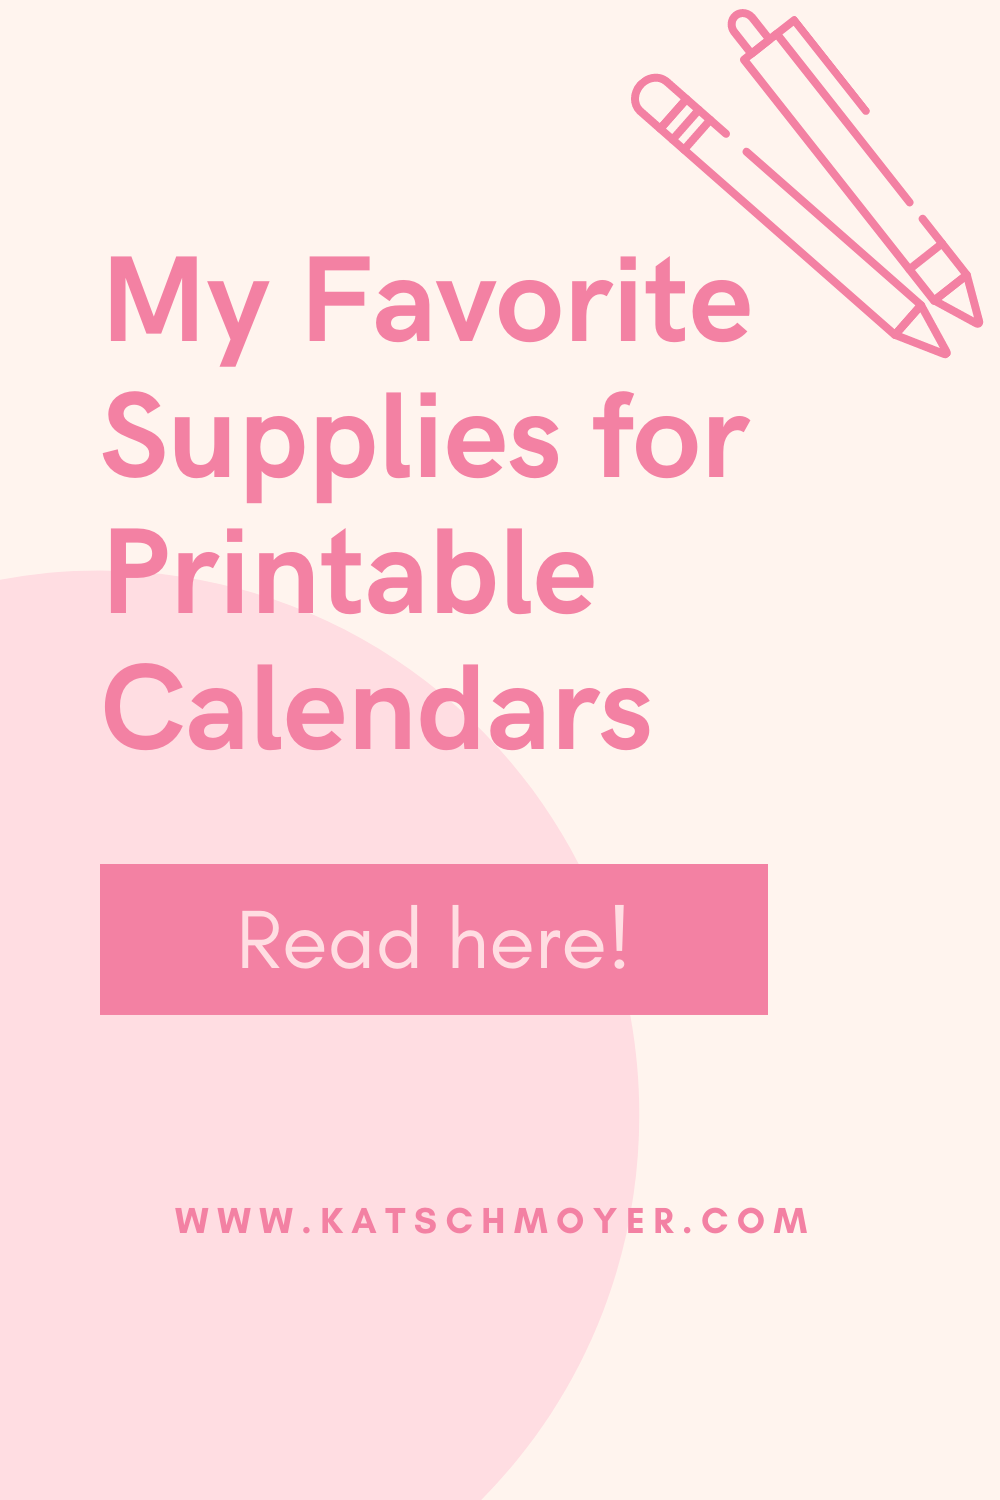 Biz coach Kat Schmoyer is sharing her favorite printable calendar supplies for her yearly and quarterly calendars for small business owners, moms, and families